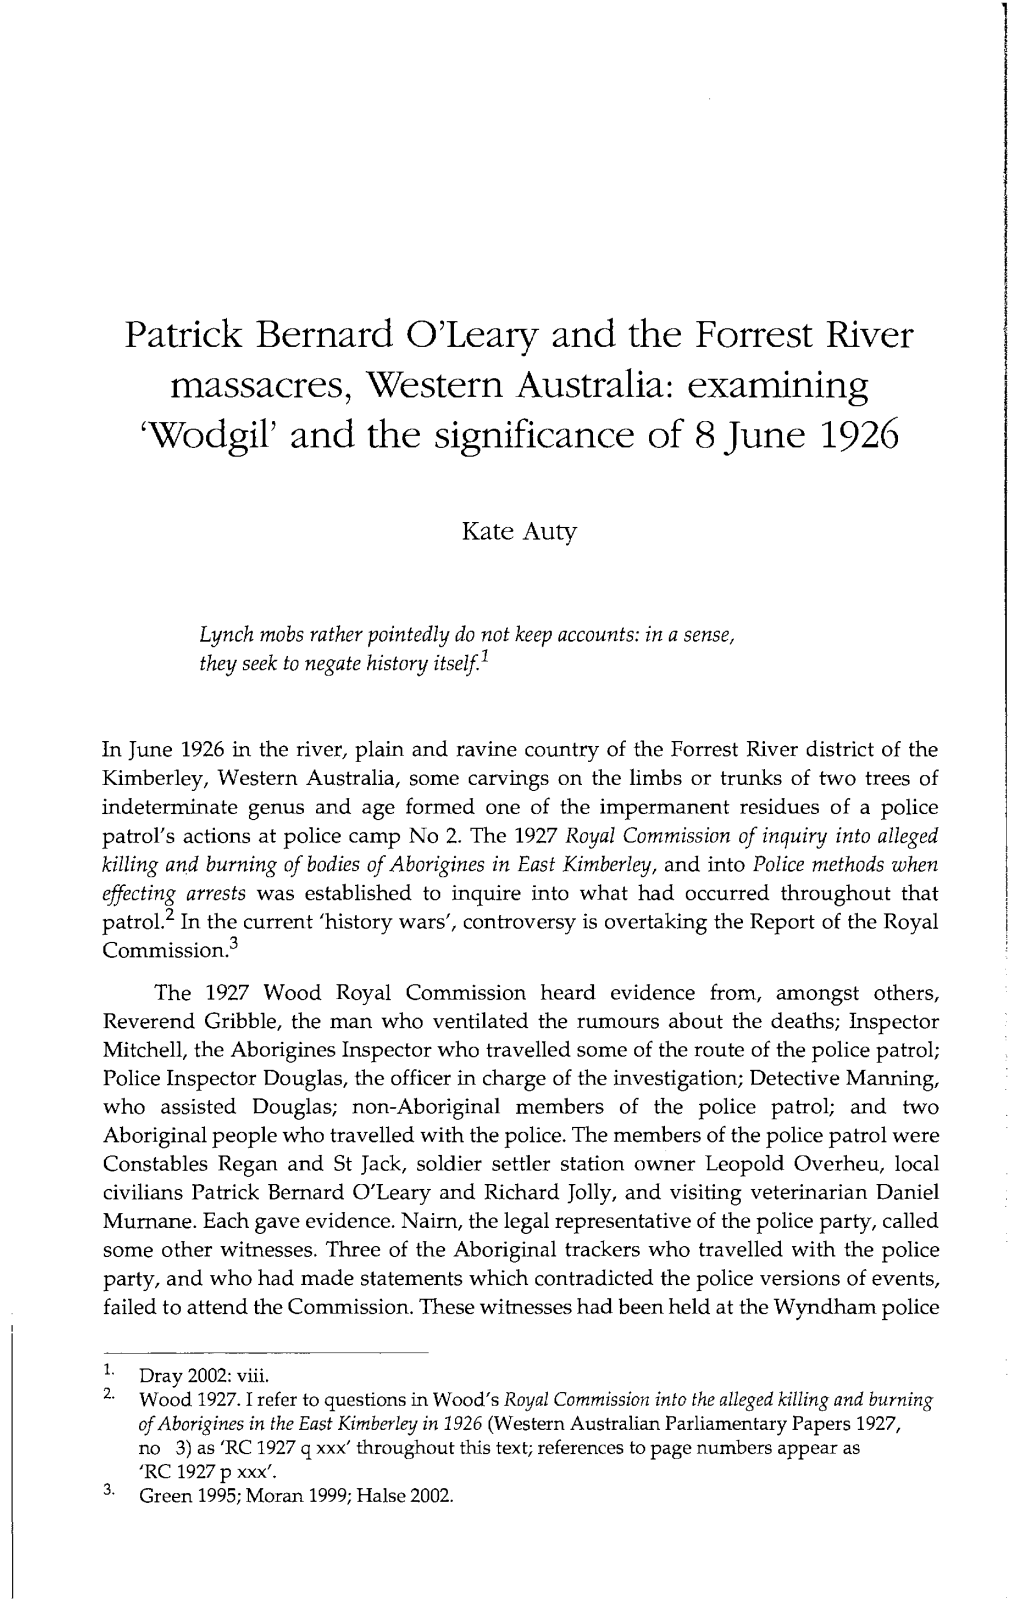 Patrick Bernard O'leary and the Forrest River Massacres, Western Australia: Examining 'Wodgil' and the Significance Of